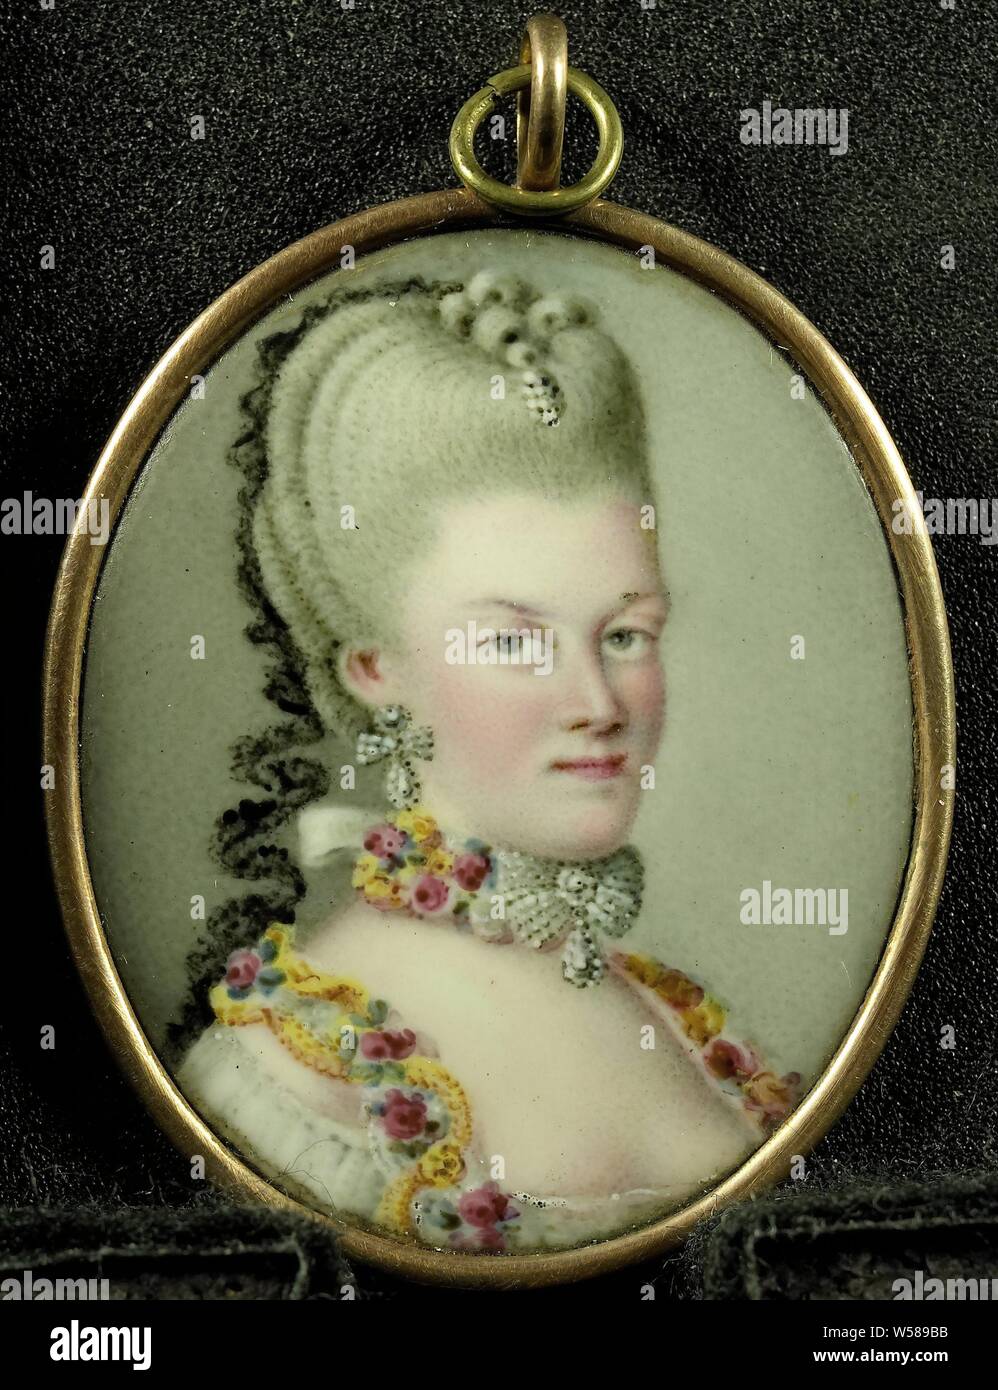 Frederika Sophia Wilhelmina (1751-1820), Princess of Prussia, Wife of Prince Willem V, Portrait of Frederika Sophia Wilhelmina (1751-1820), Wife of Prince Willem V. Bust, after right, looking at the viewer. Part of the collection of portrait miniatures, Wilhelmina van Prussia (1751-1820), anonymous, Holland, c. 1775, copper (metal), h 3.9 cm × w 3.2 cm h 5.1 cm × w 3.3 cm × d 0.5 cm Stock Photo